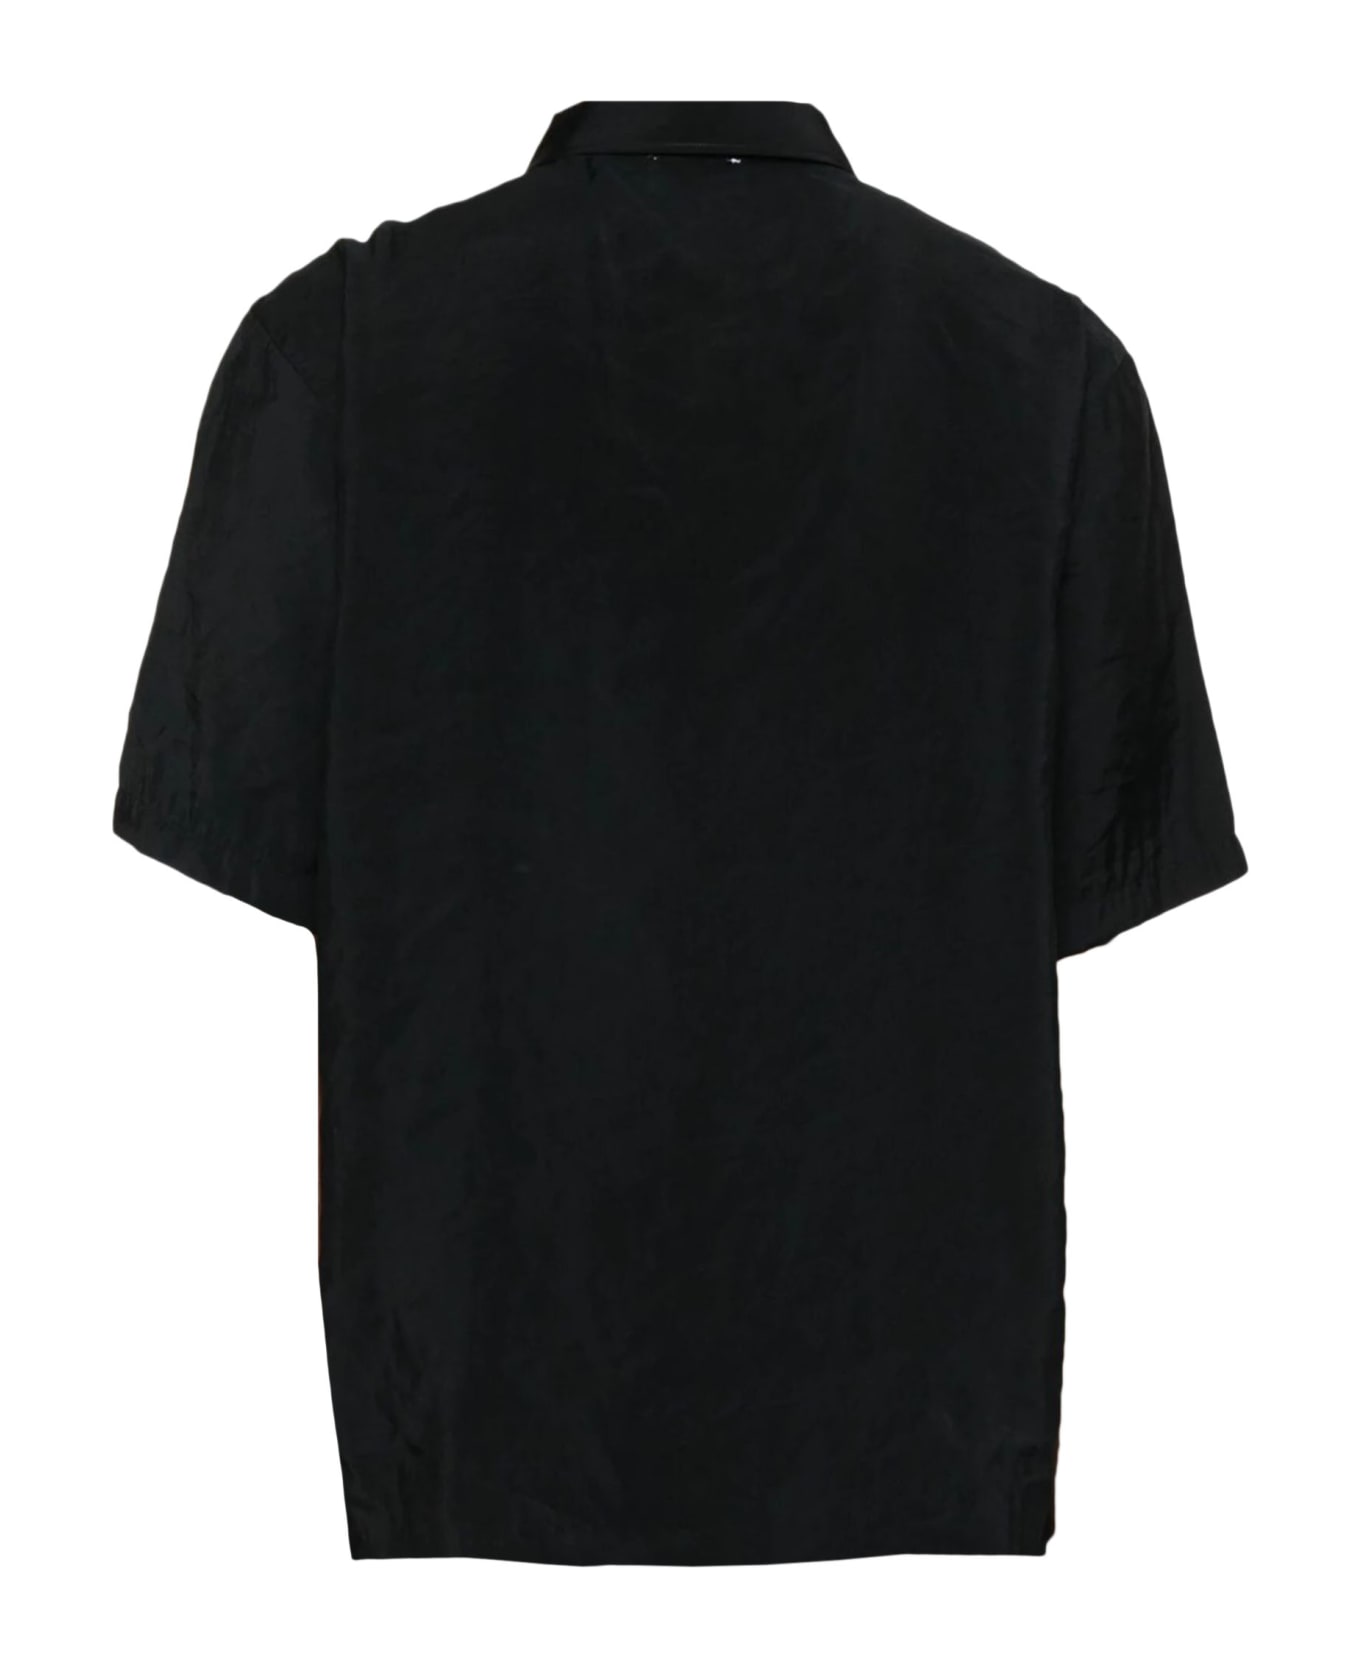 Family First Milano Family First Shirts Black - Black シャツ